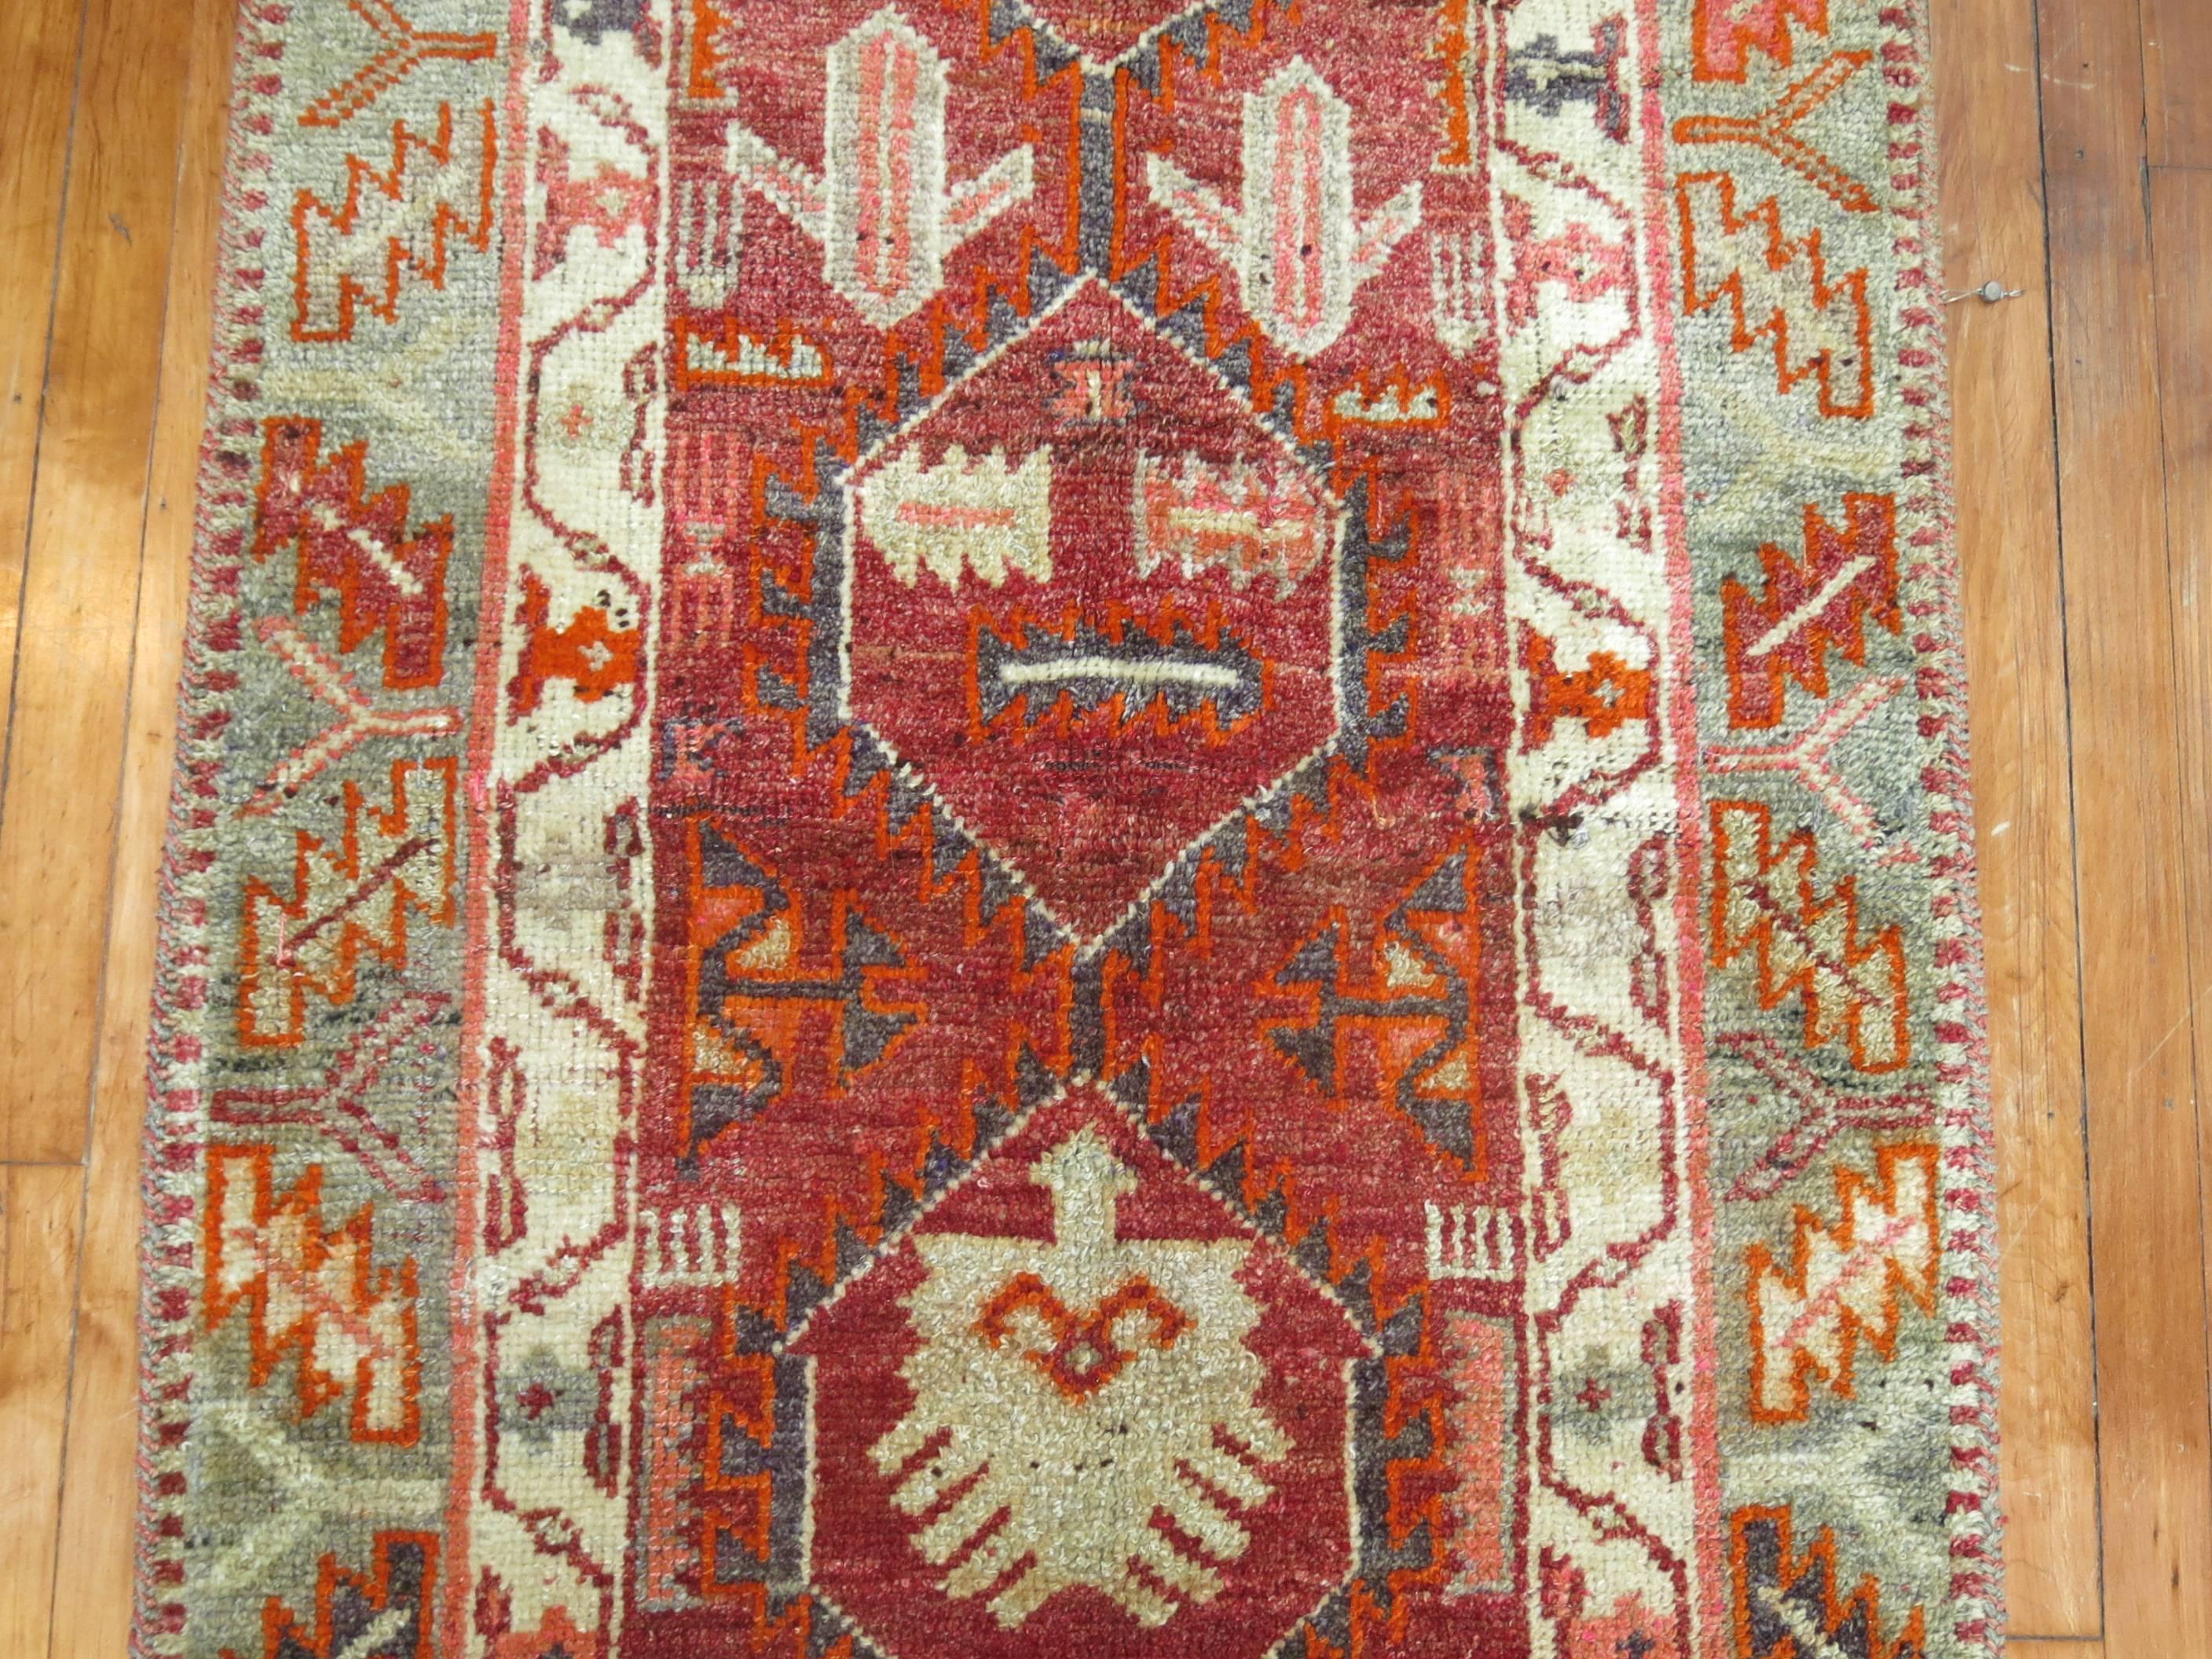 Vintage one of a kind Armenian runner with predominant accents in brown, burgundy and green on all-over design.

Measures: 2'11